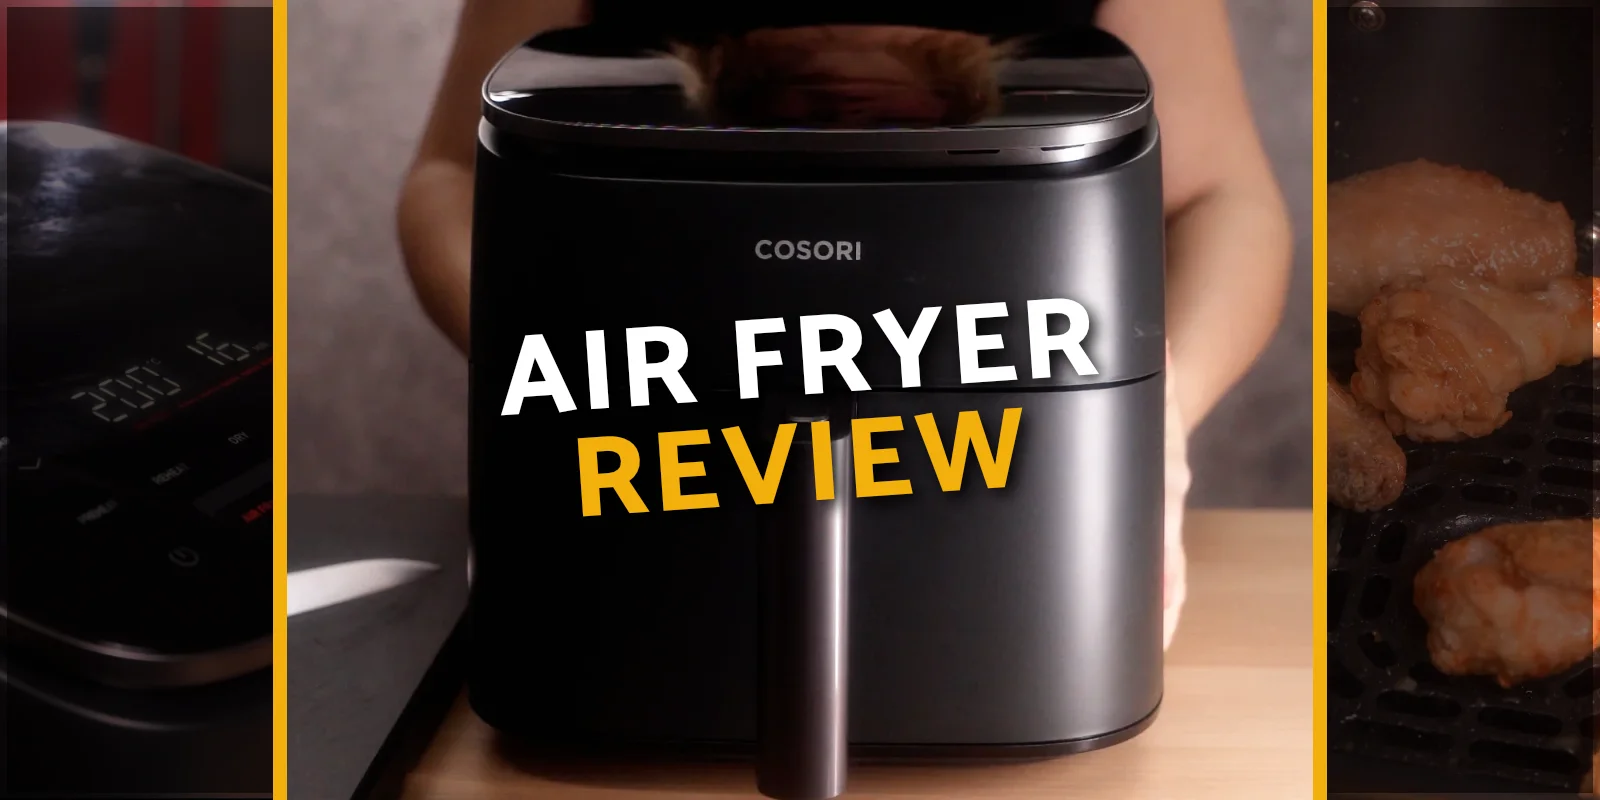 Cosori Air Fryer Review —Does the TurboBlaze 6.0-Quart Deliver?